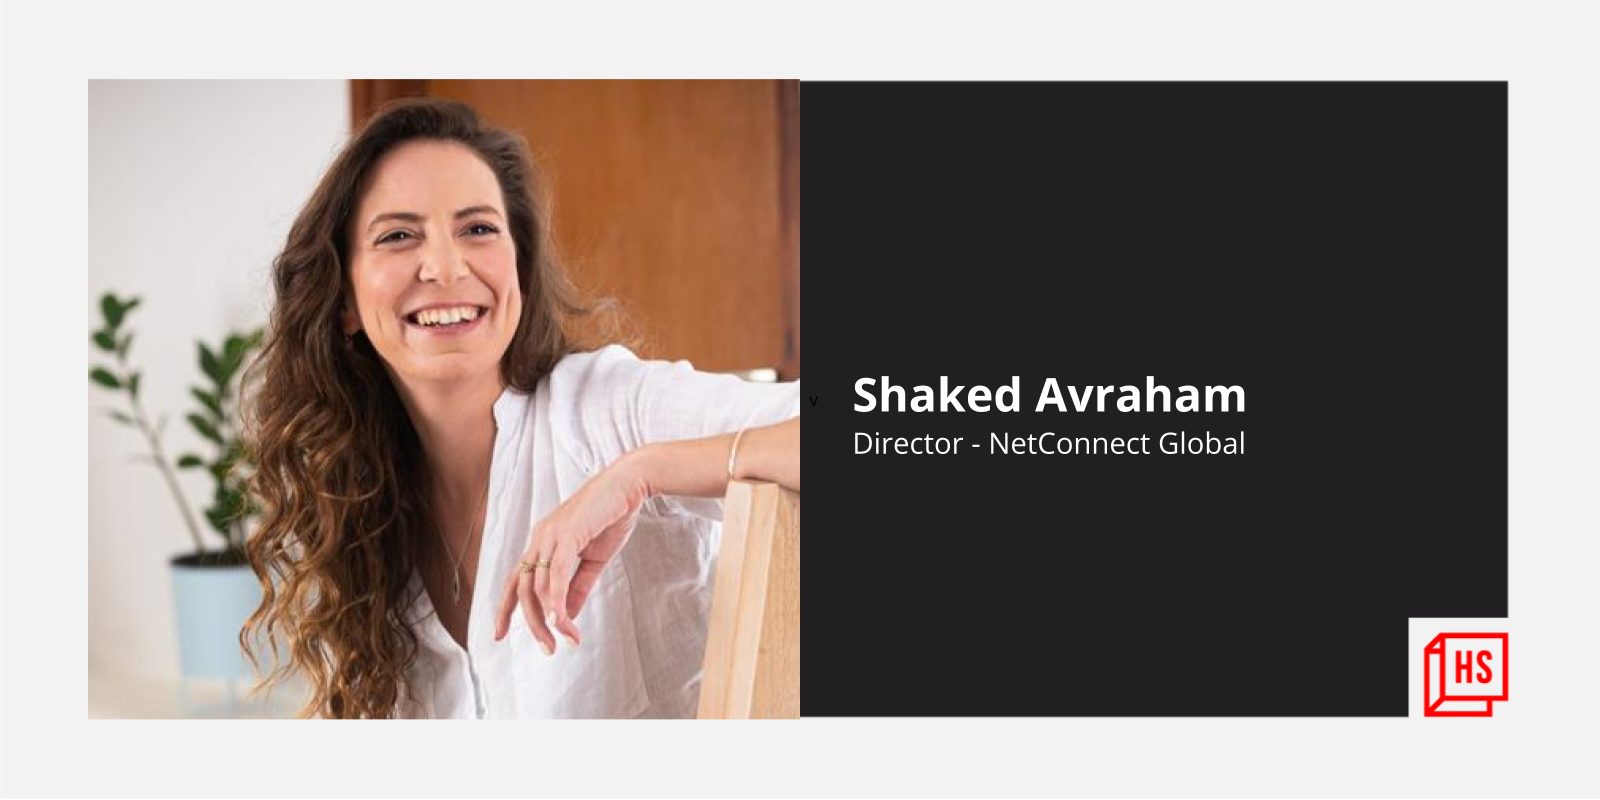 [Women in Tech] Untapped potential needs to be recognised and empowered, says Shaked Avraham of NetConnect Global